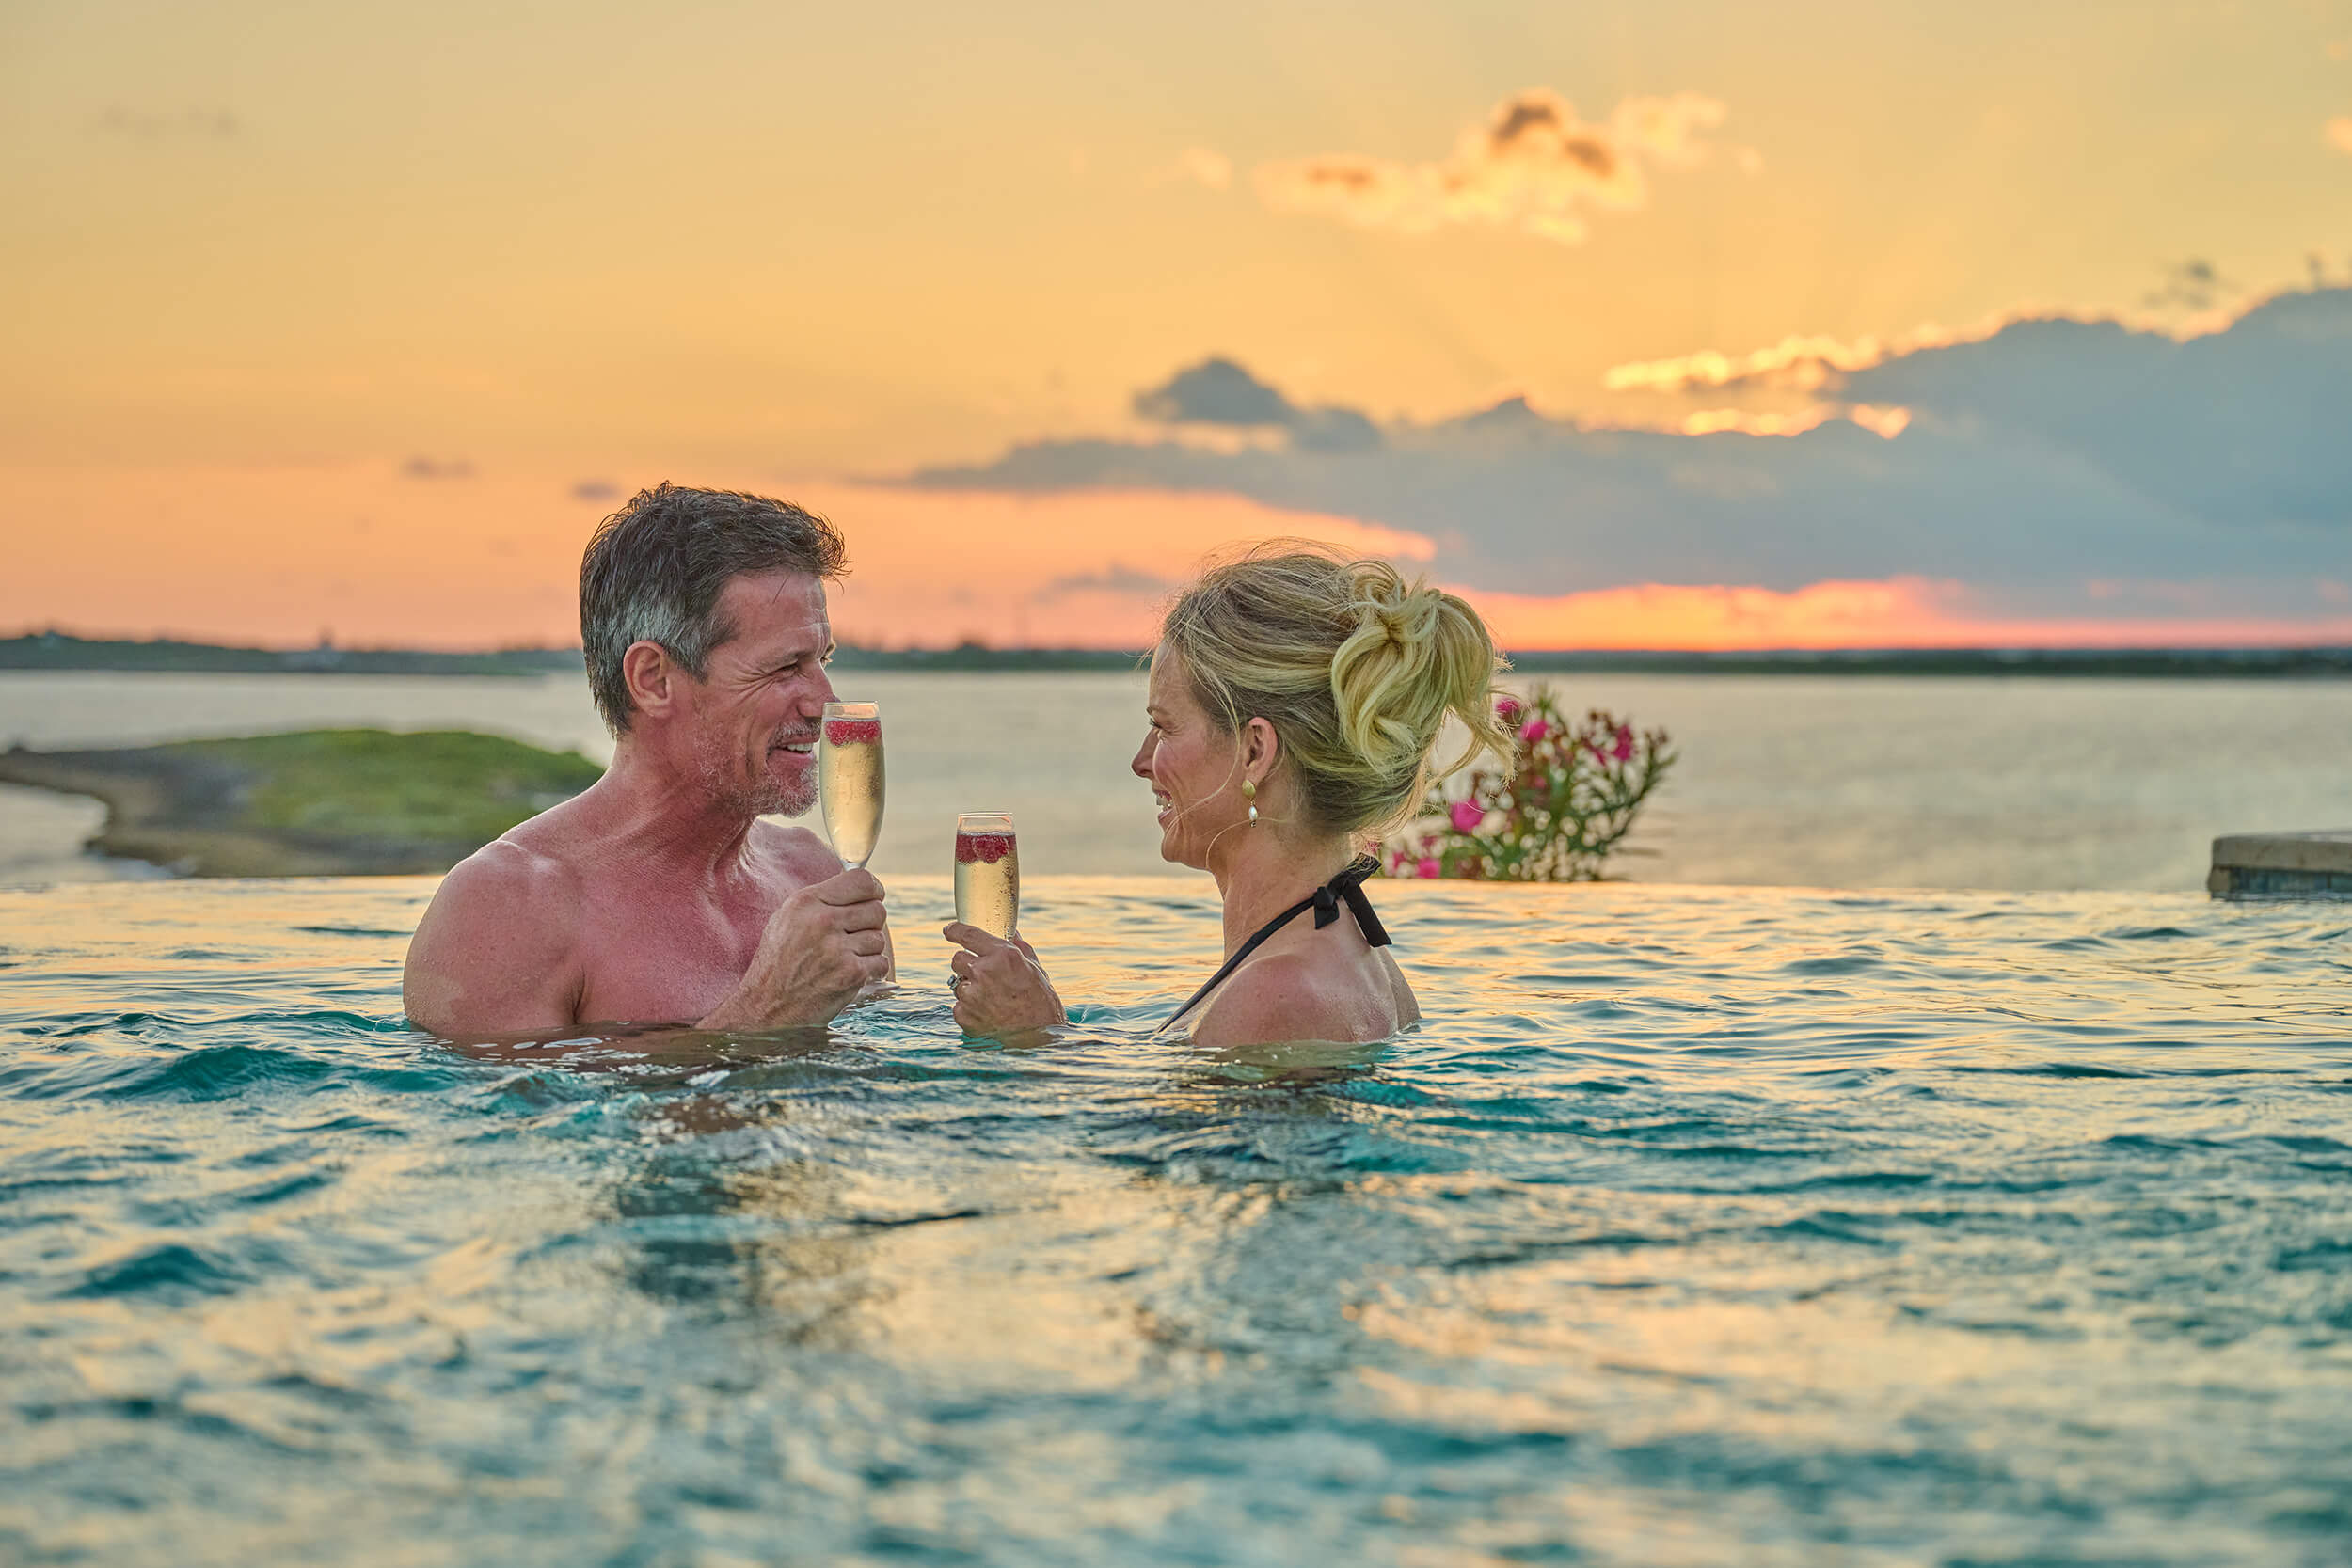 Couple in an infinity pool enjoying a tropical sunset, embodying the romantic club lifestyle at The Abaco Club.